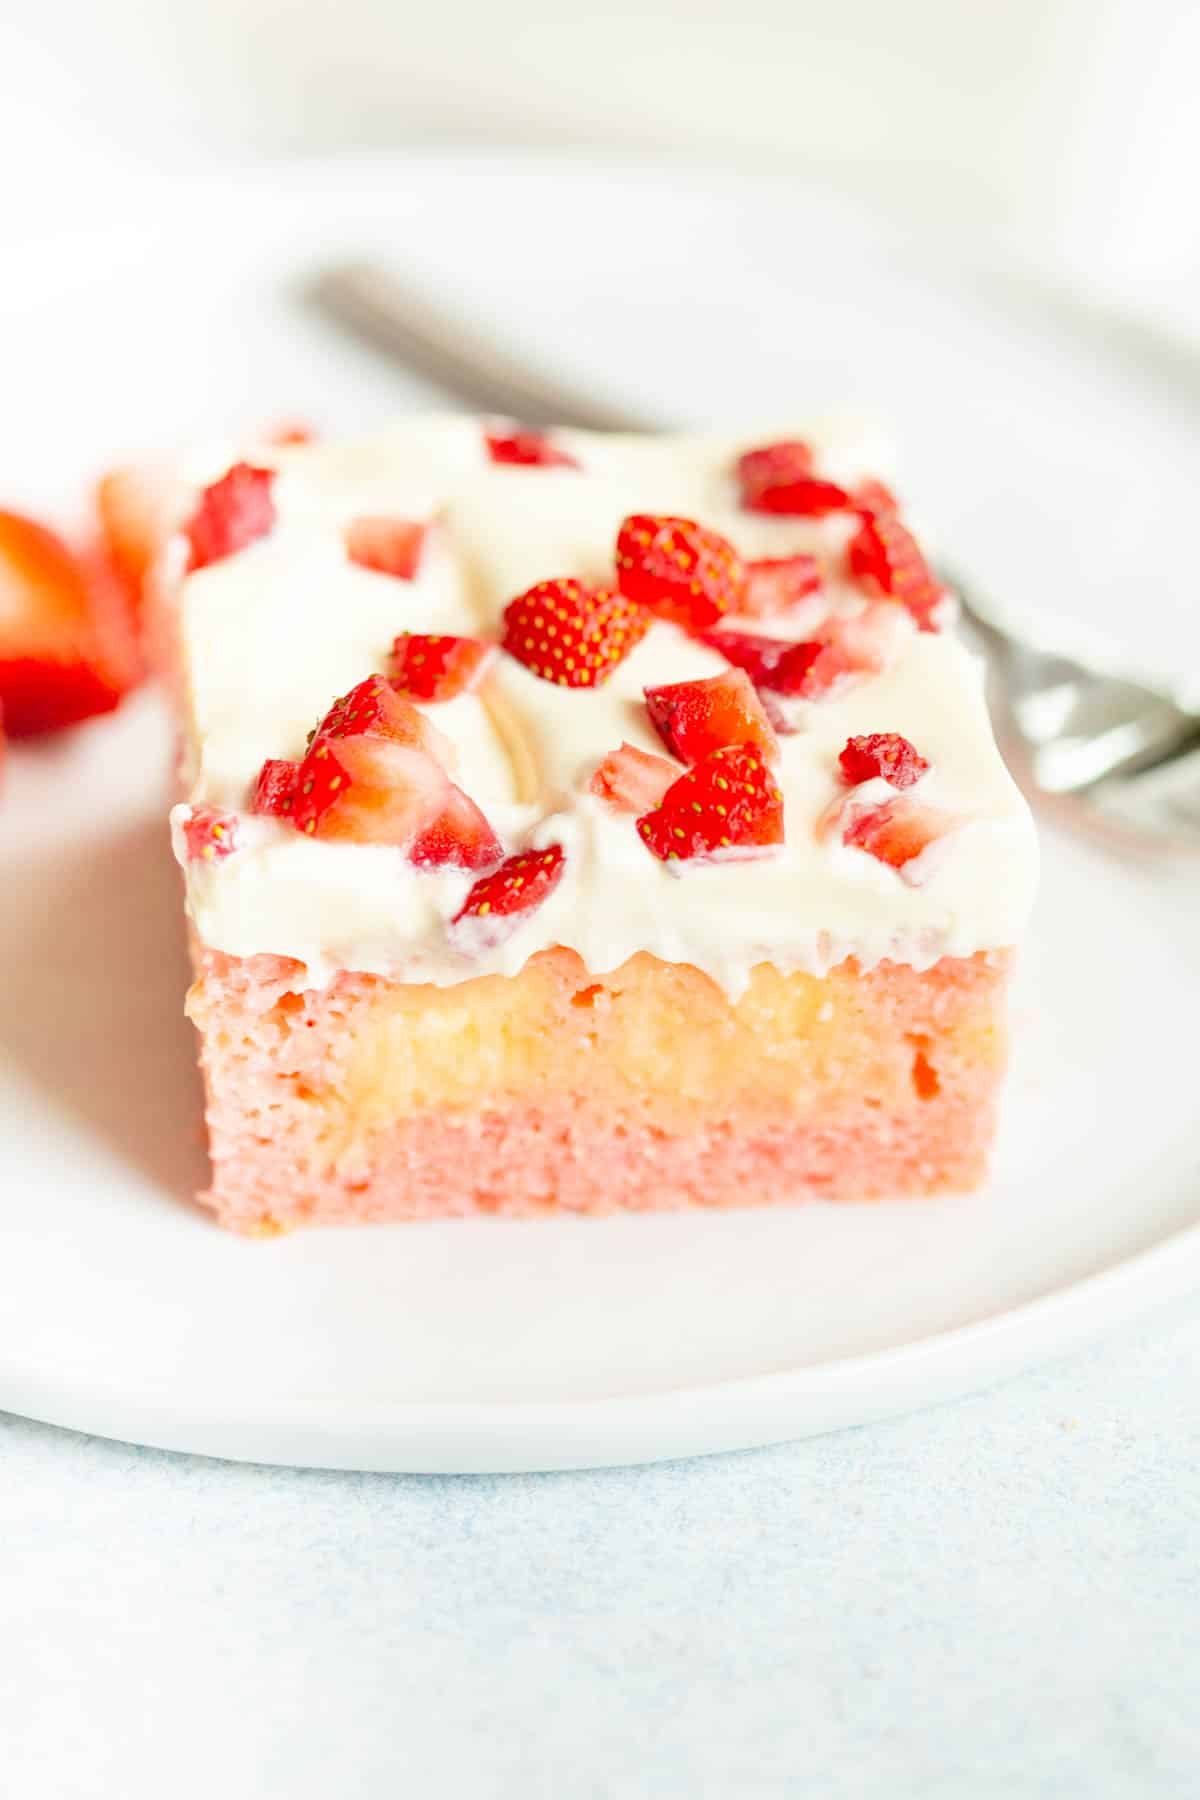 A slice of Strawberry Pudding Poke Cake on a white plate, topped with chopped strawberries. There is a silver fork in the background.